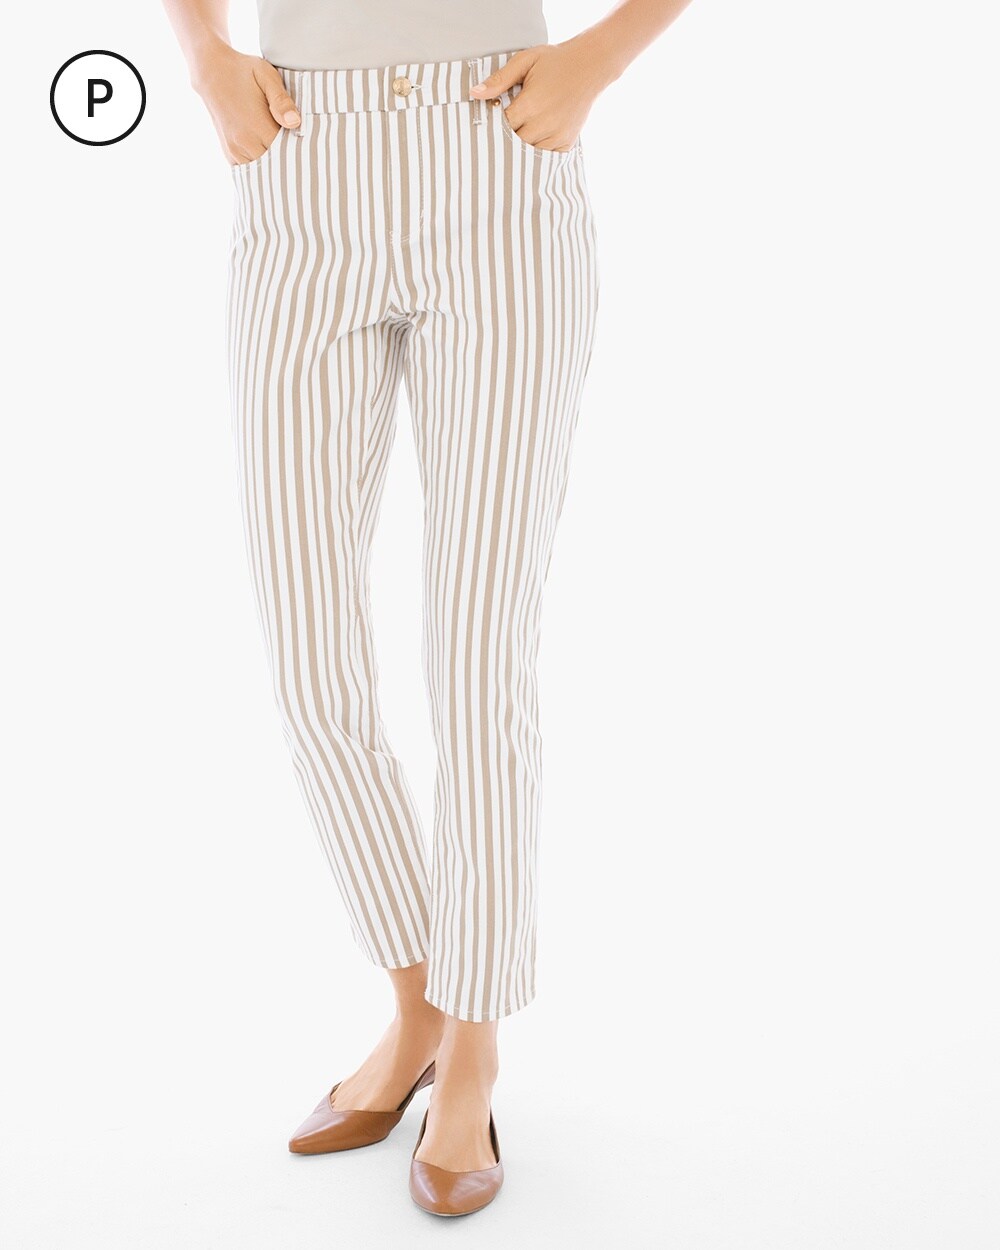 So Slimming Petite Striped Girlfriend Ankle Jeans